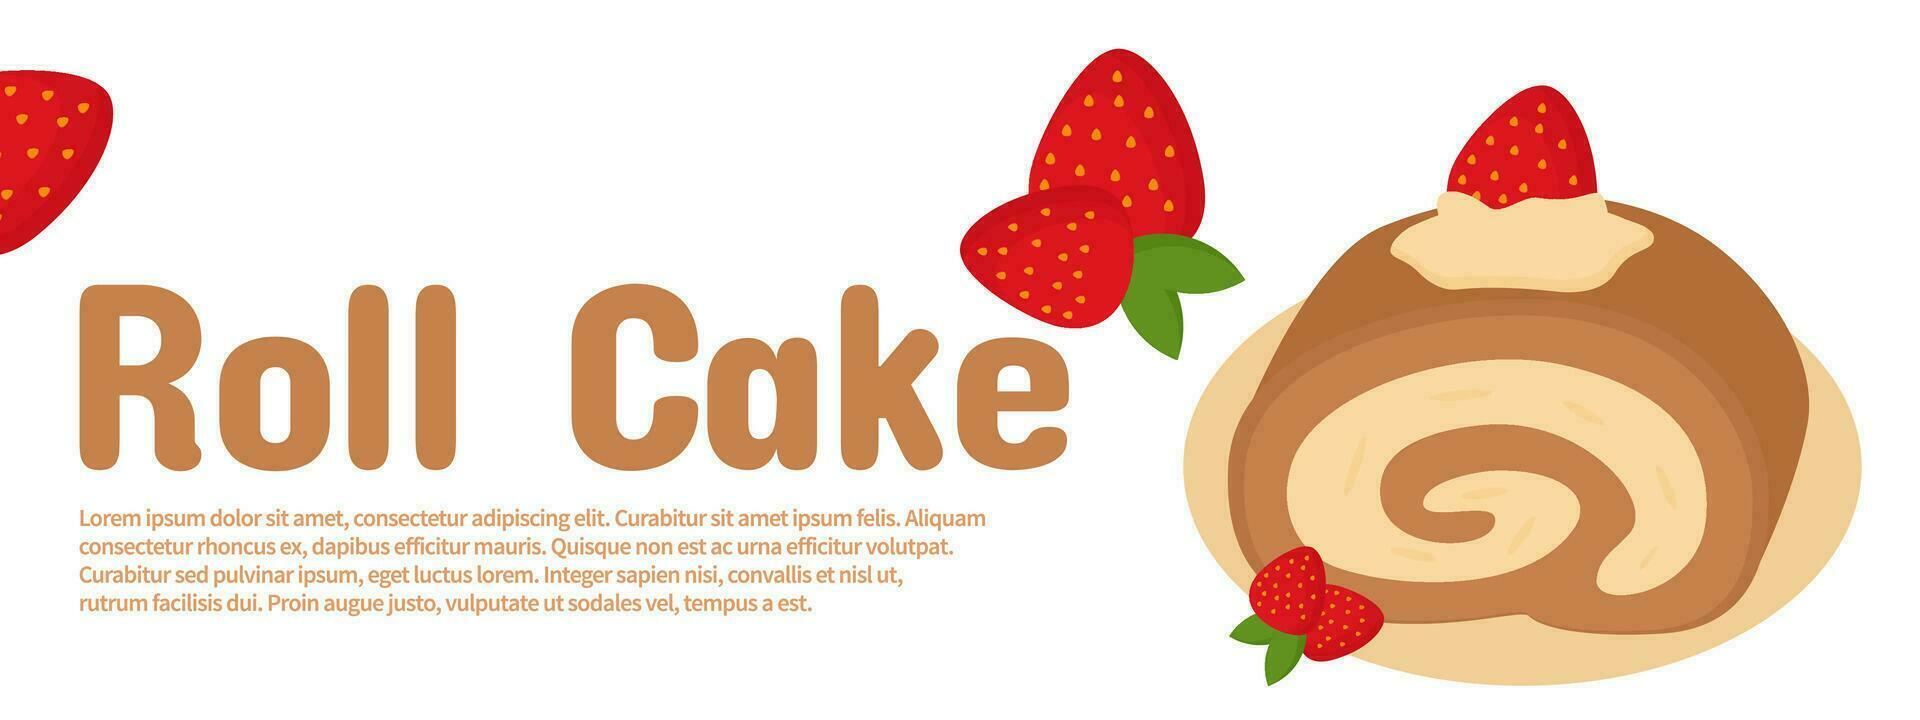 promotional banner for rolled sponge cake with a flat illustration of cute rolled sponge cake for a bakery shop vector